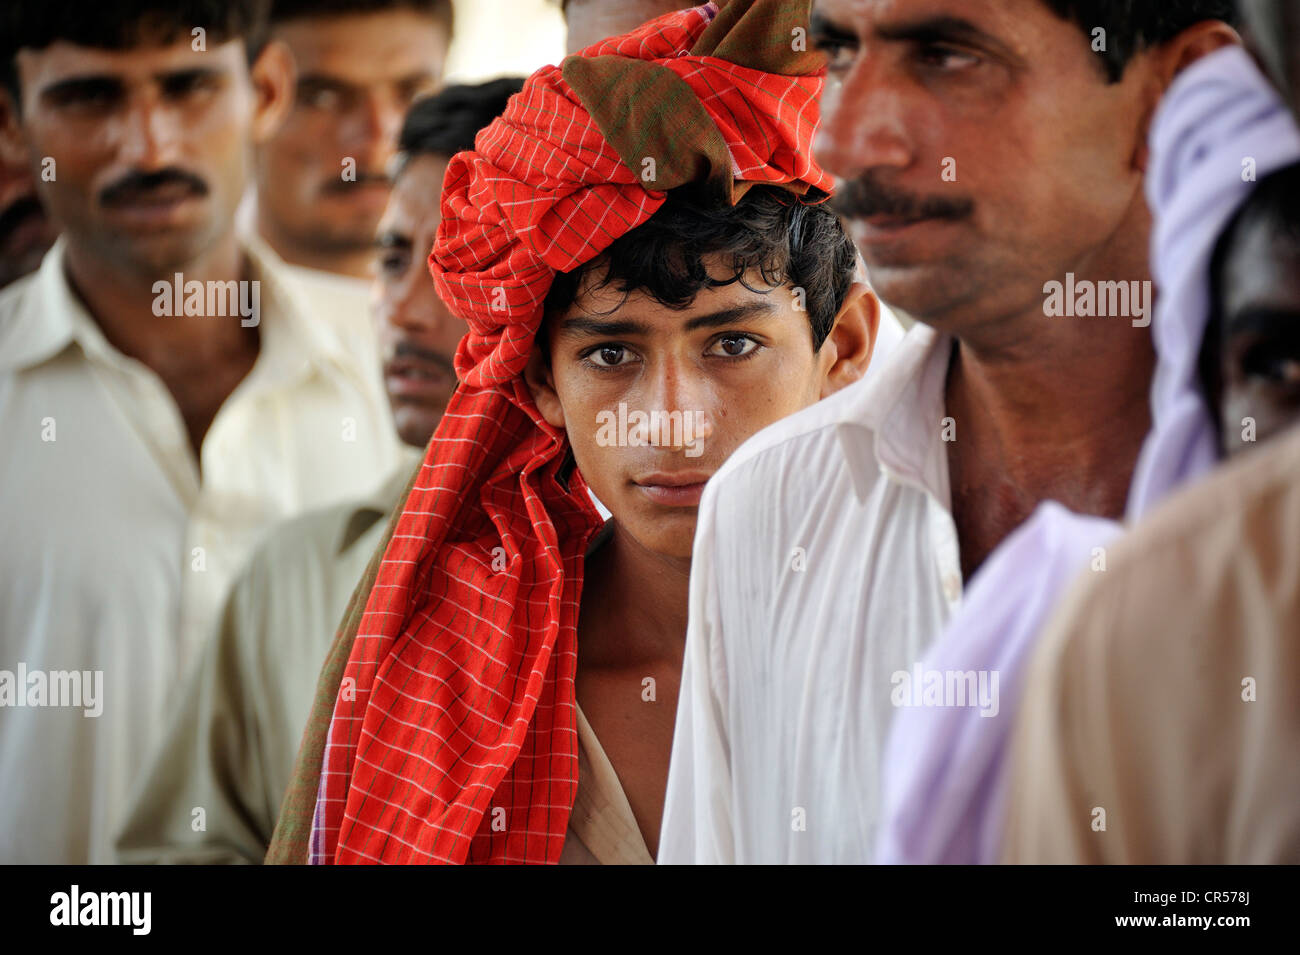 Youth wearing a red cloth on his head and men during distribution of relief goods by a charity organisation after the flood Stock Photo